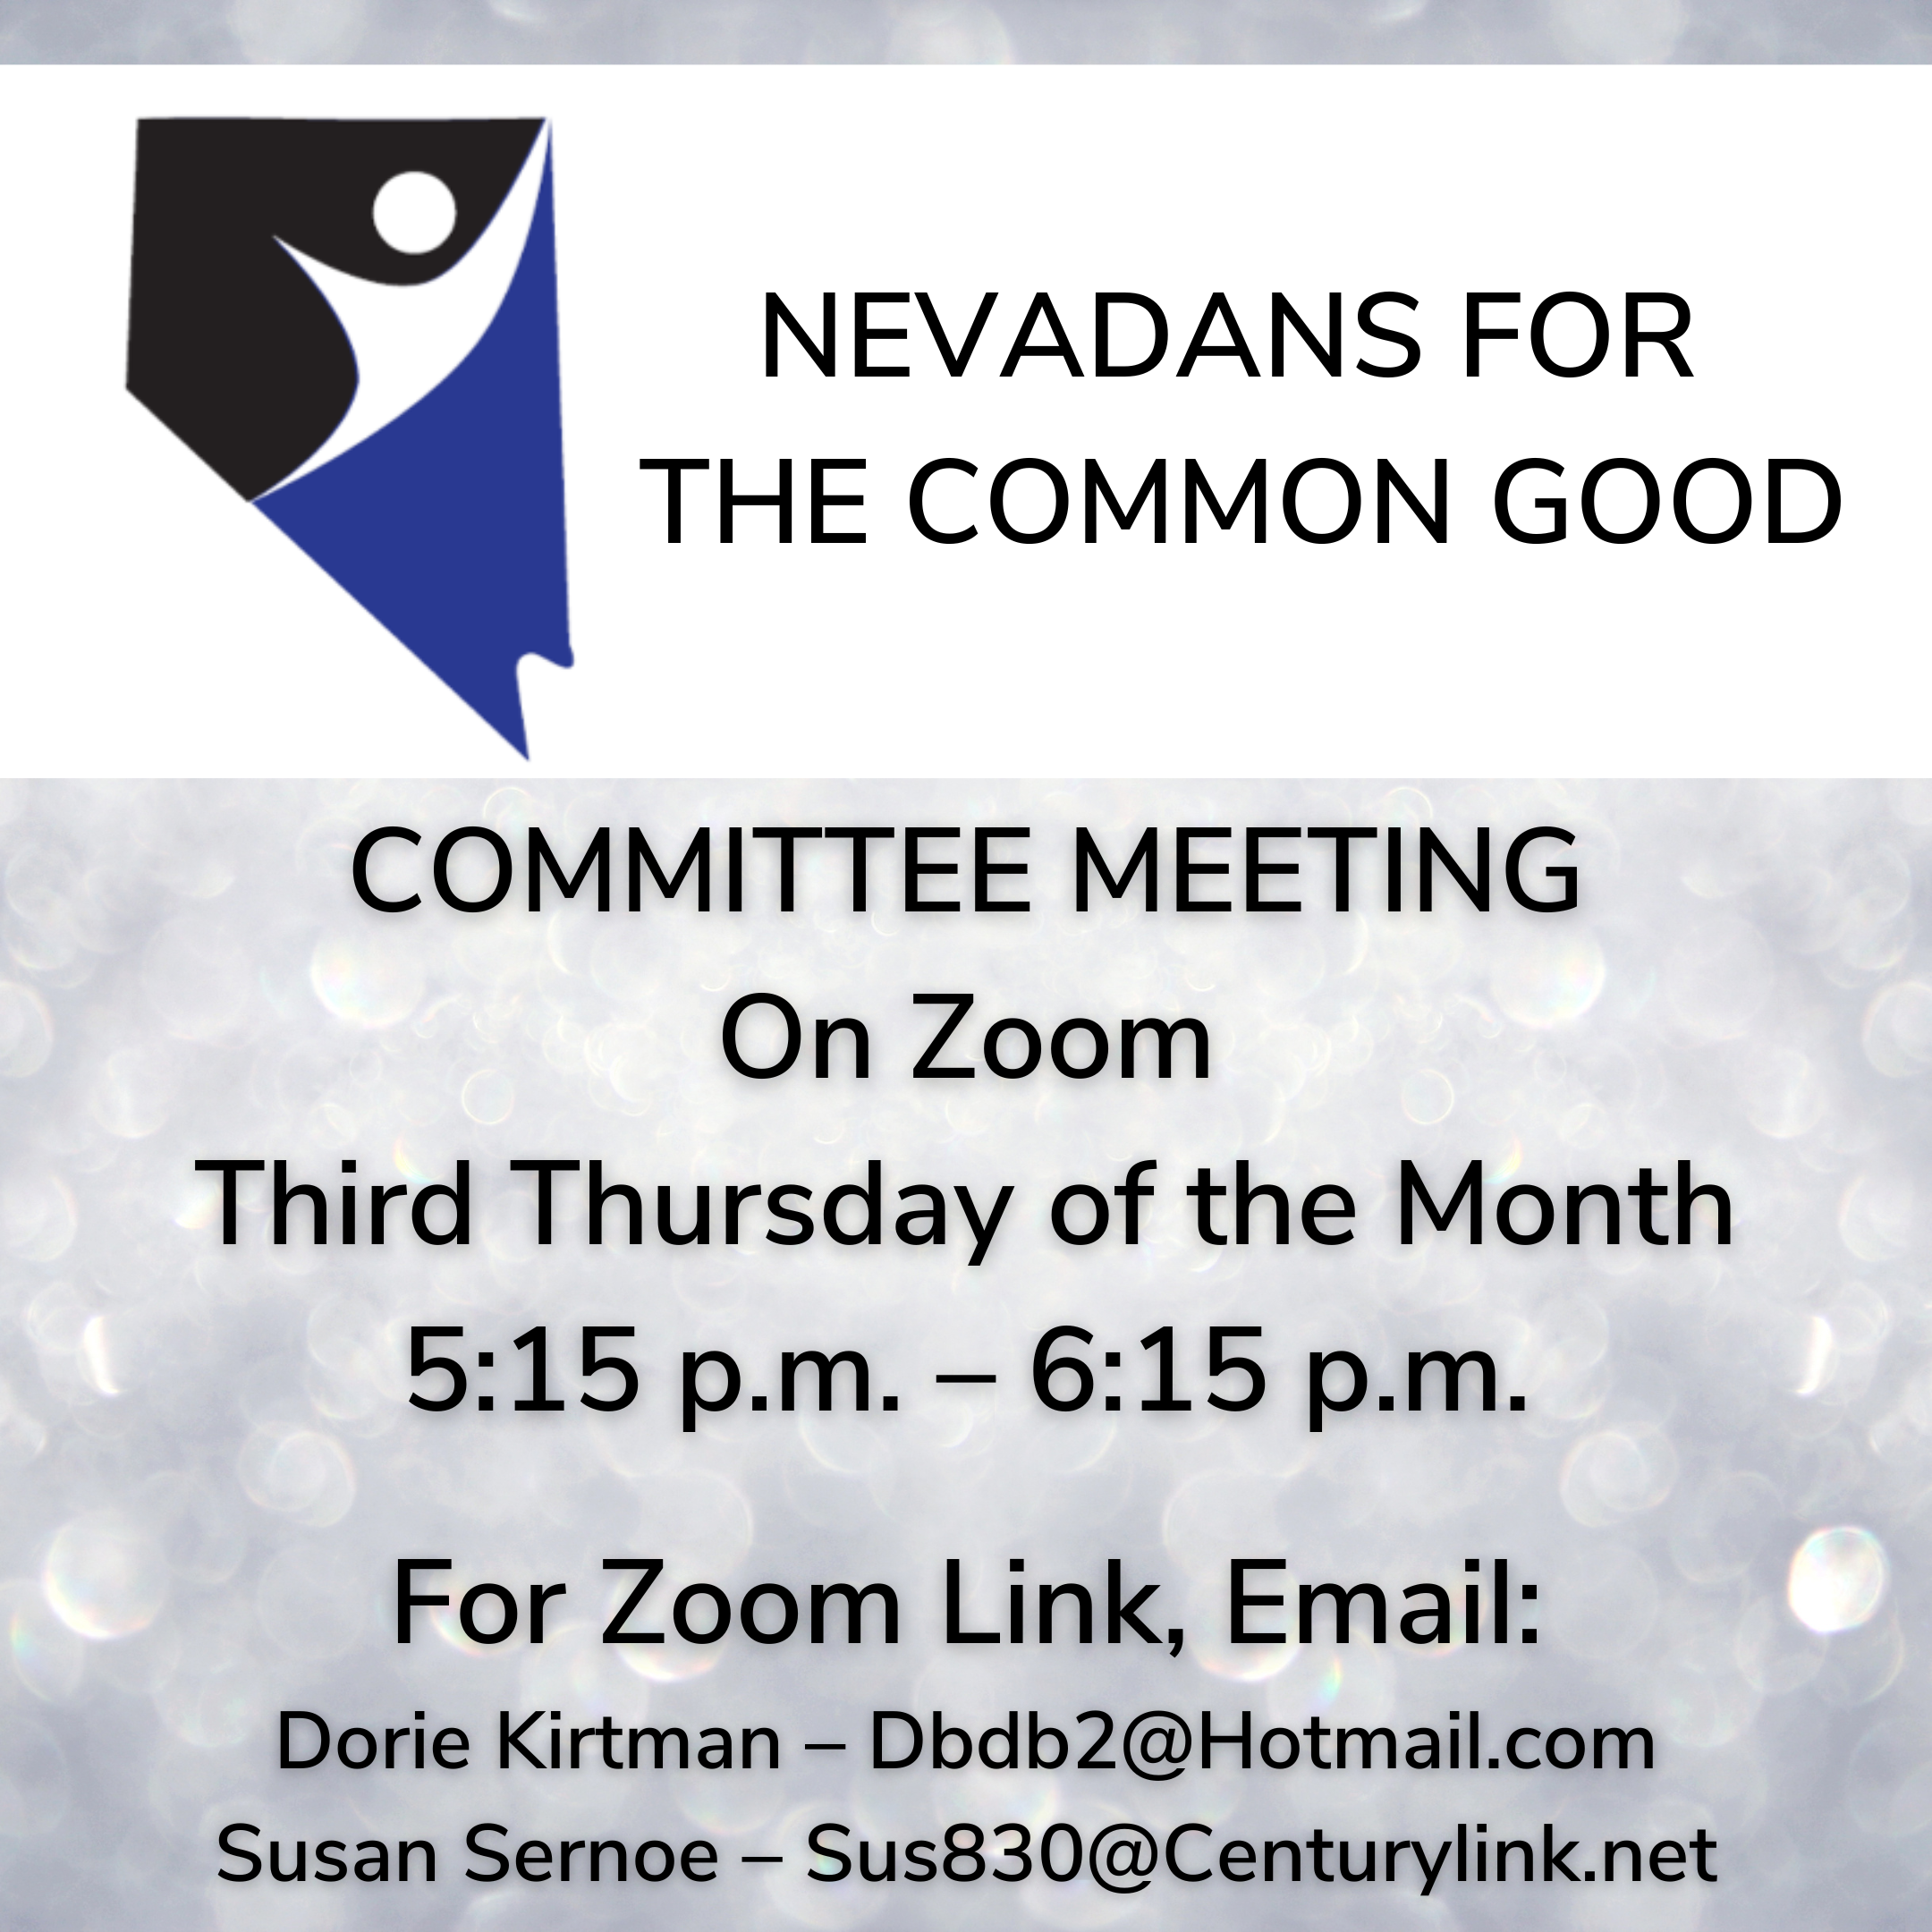 NEVADANS FOR THE COMMON GOOD MEETING